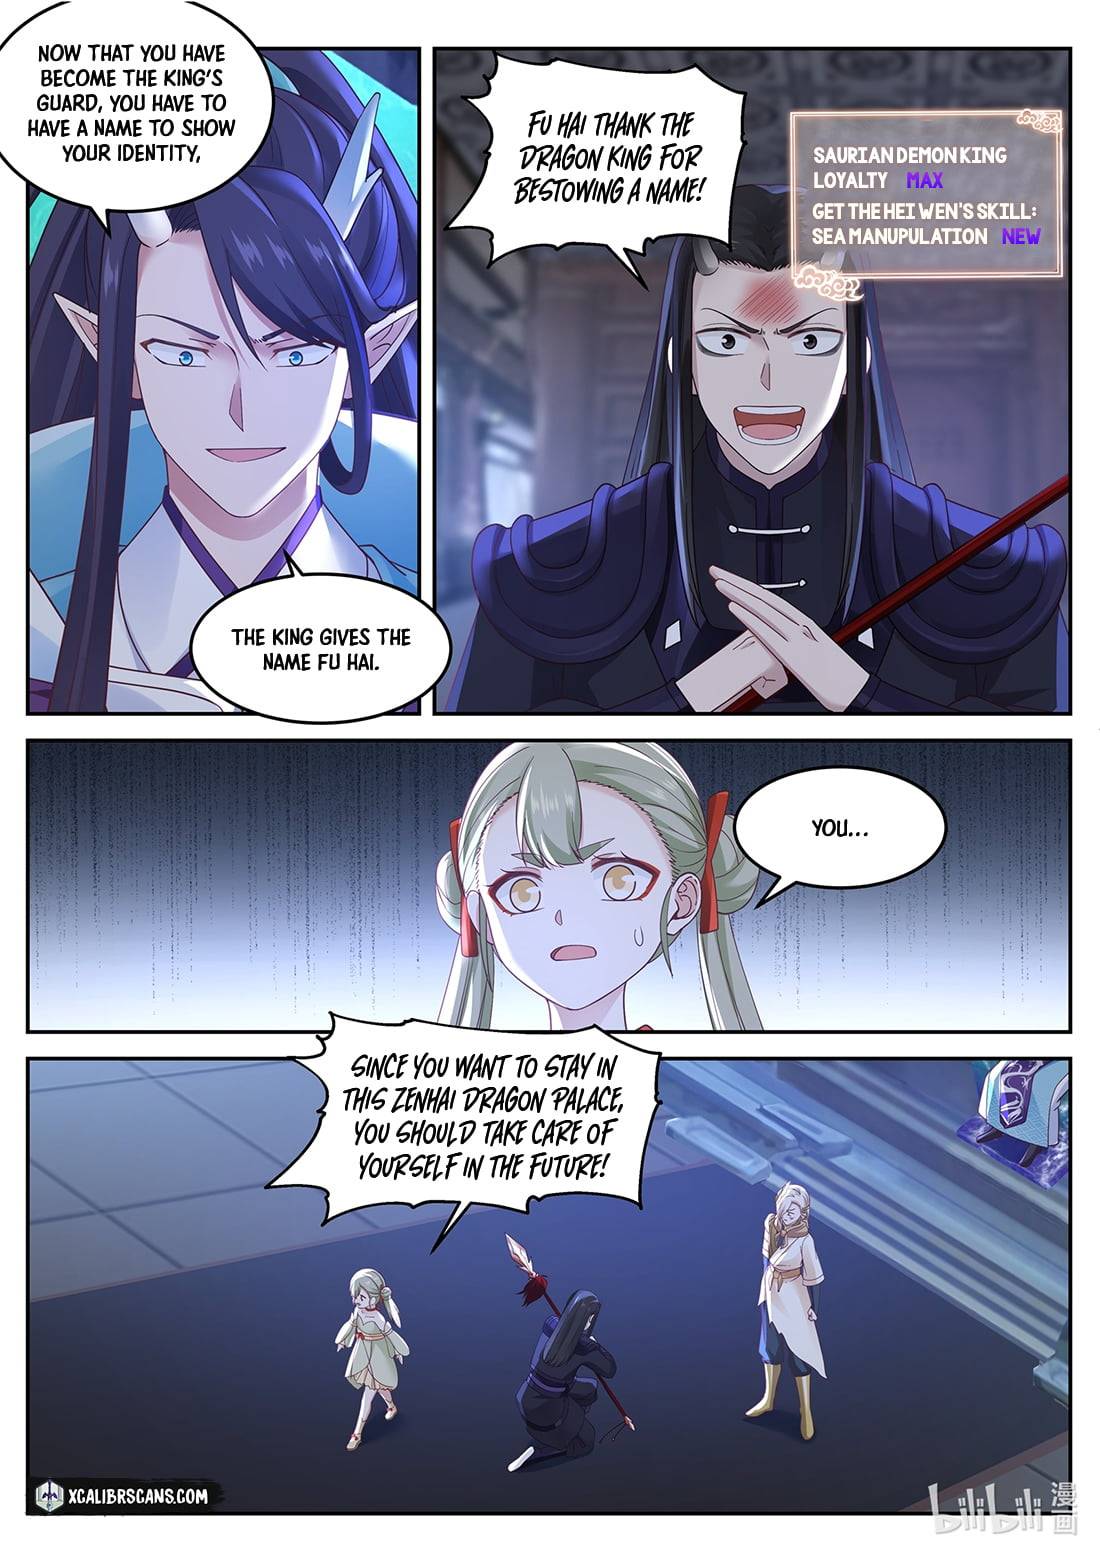 Dragon Throne Chapter 35